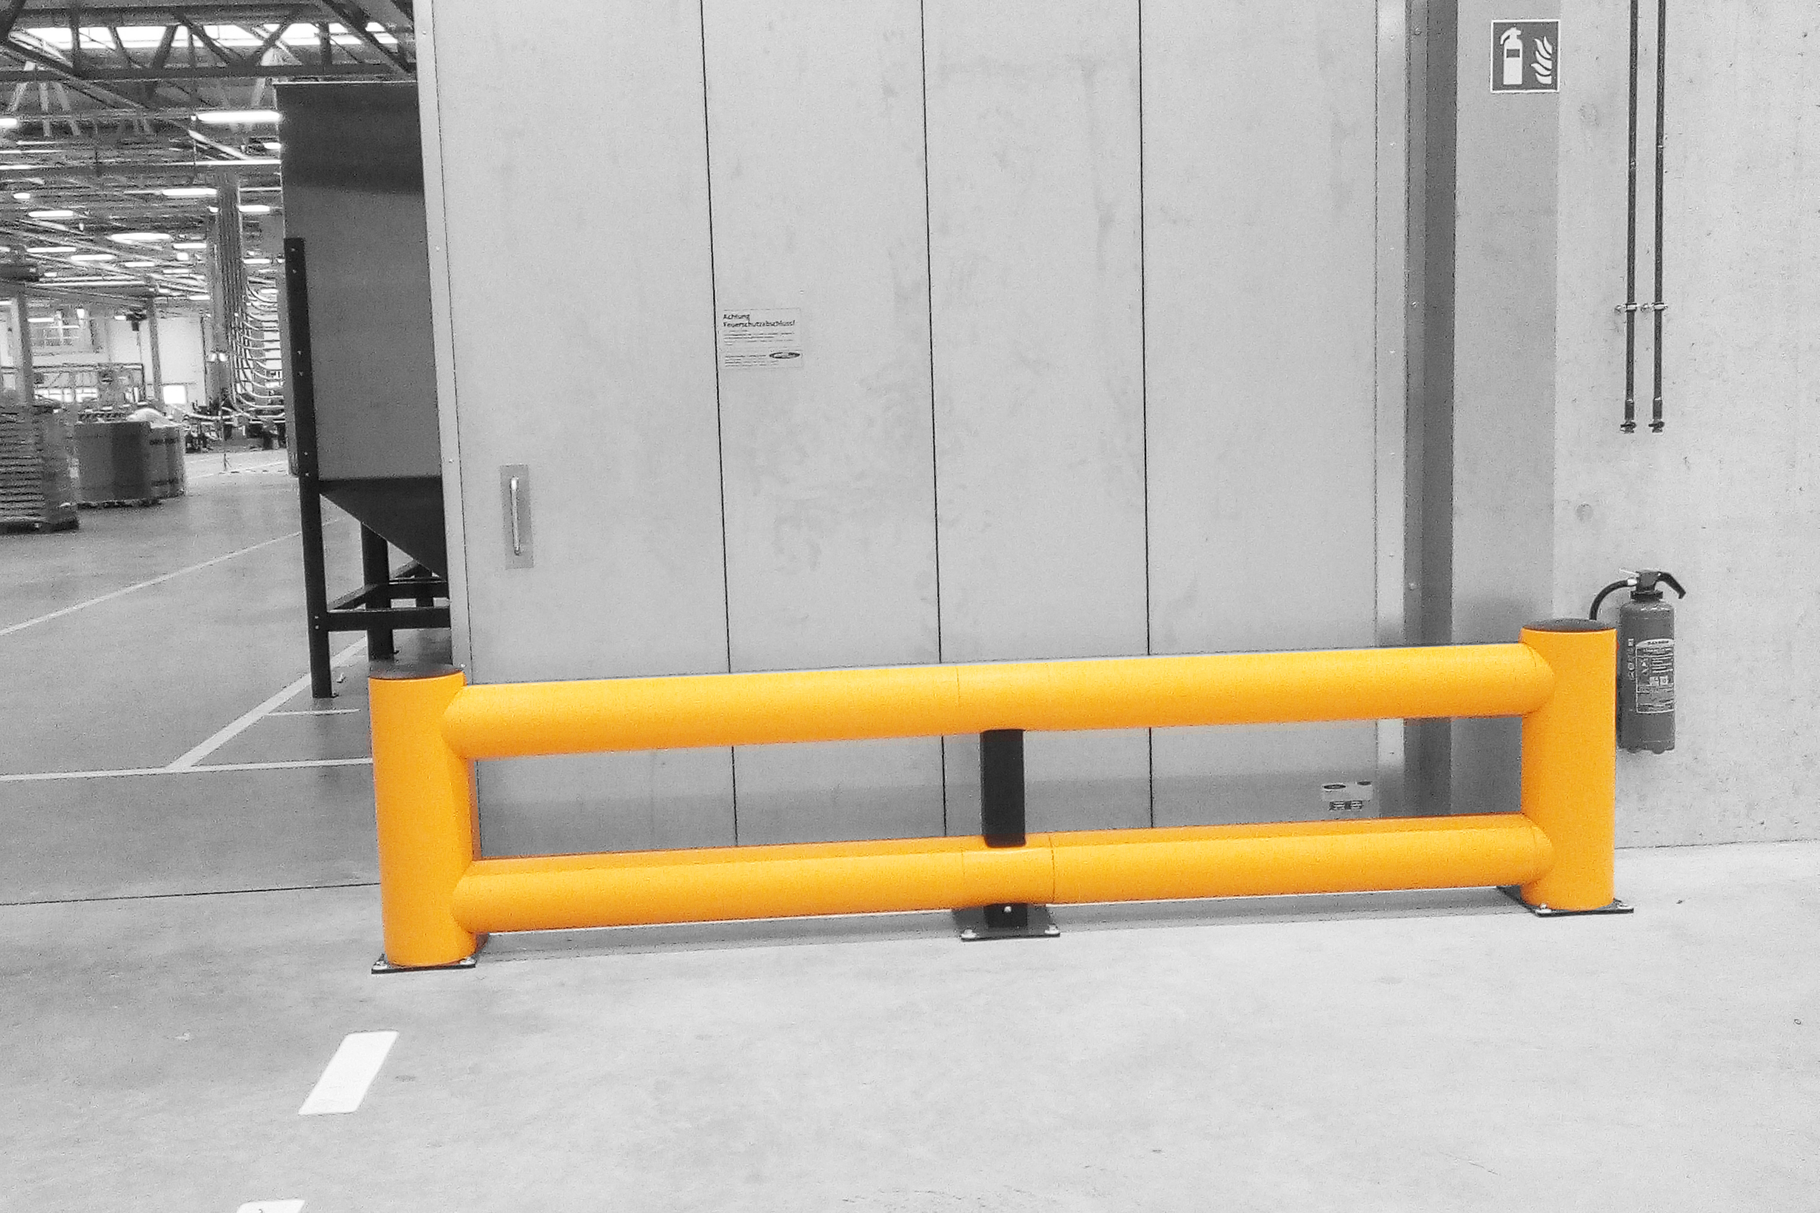 Boplan FLEX IMPACT® TB 260 Double in a live setting - safety barriers